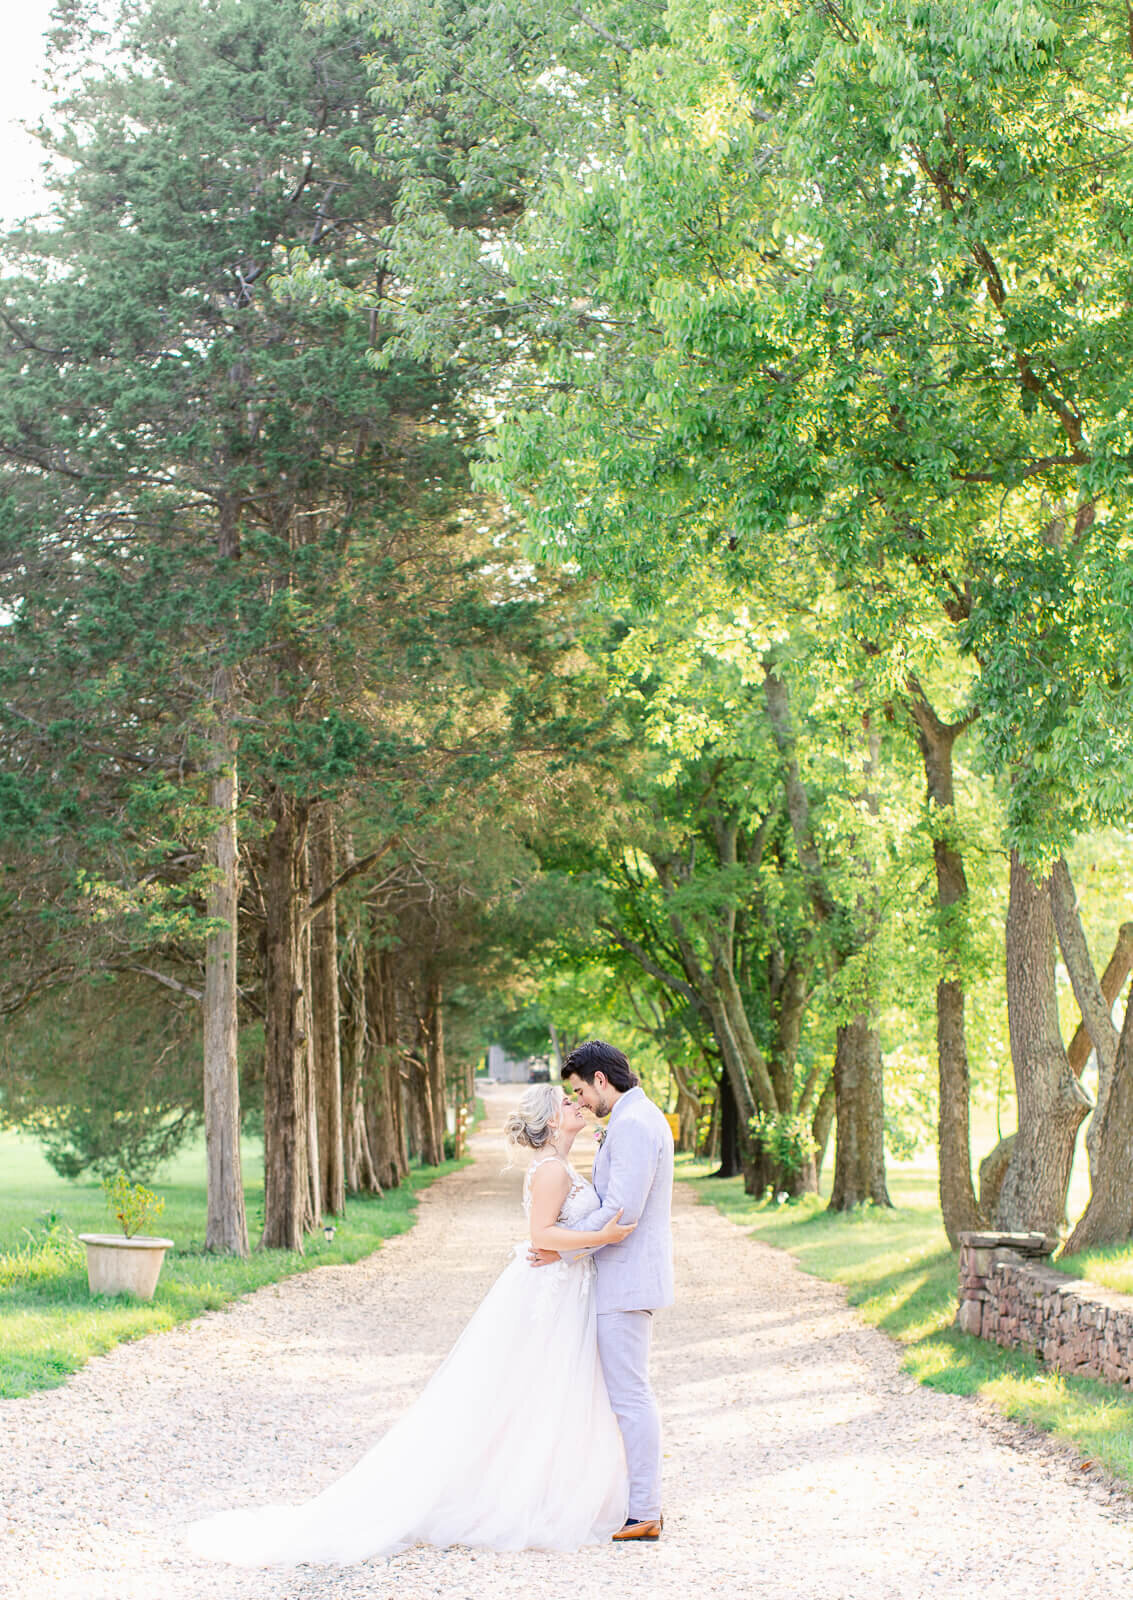 Bride and Groom surrounded by trees during golden hour at Great Marsh Estate.